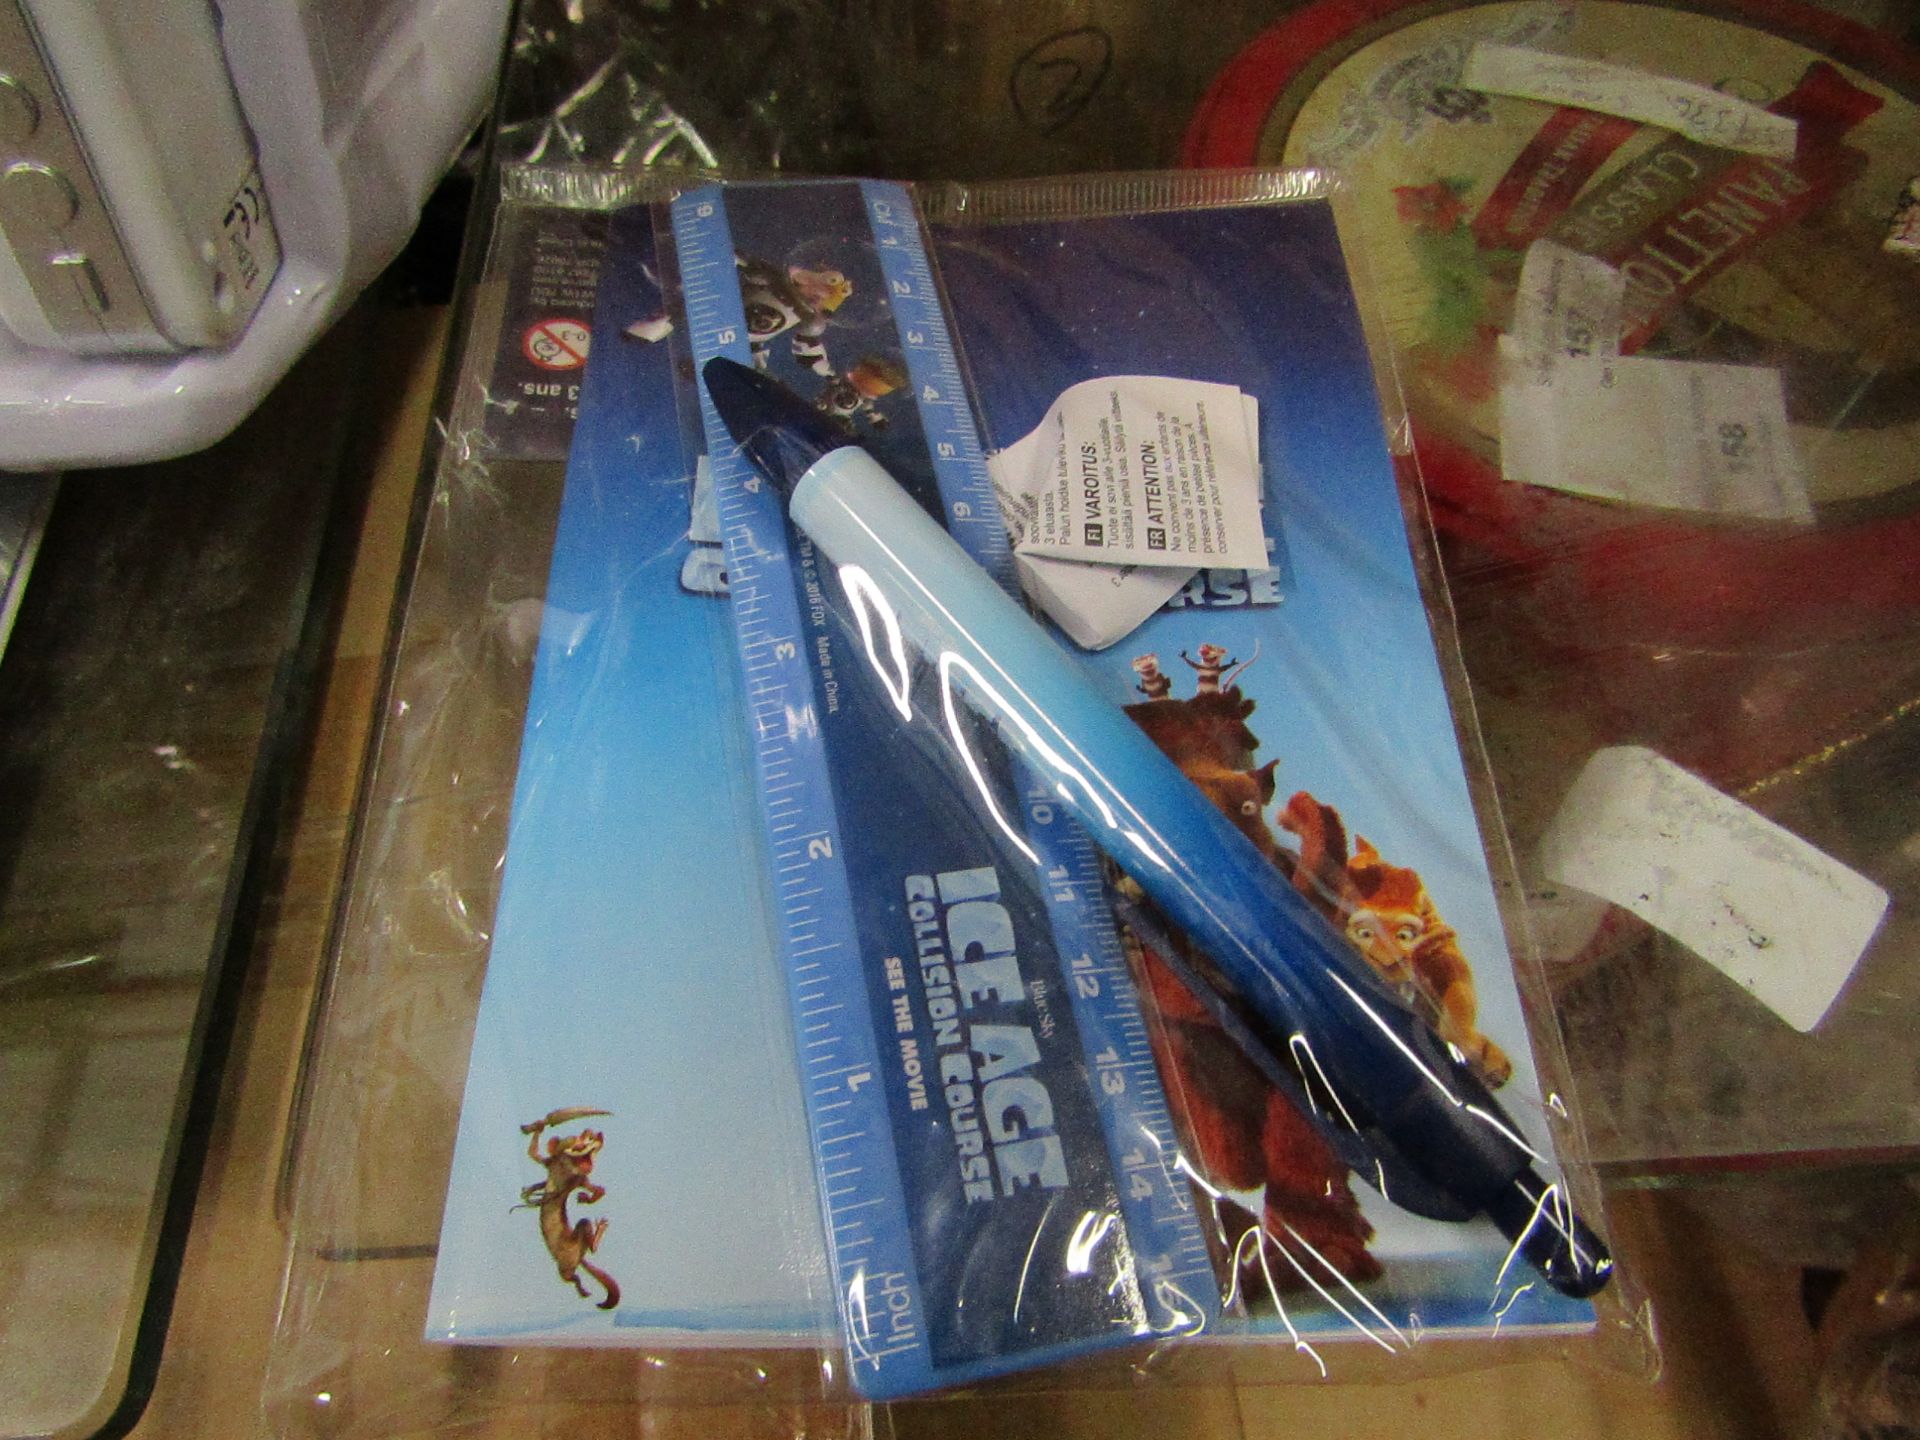 2x Ice age collision course stationery set, New & Packaged